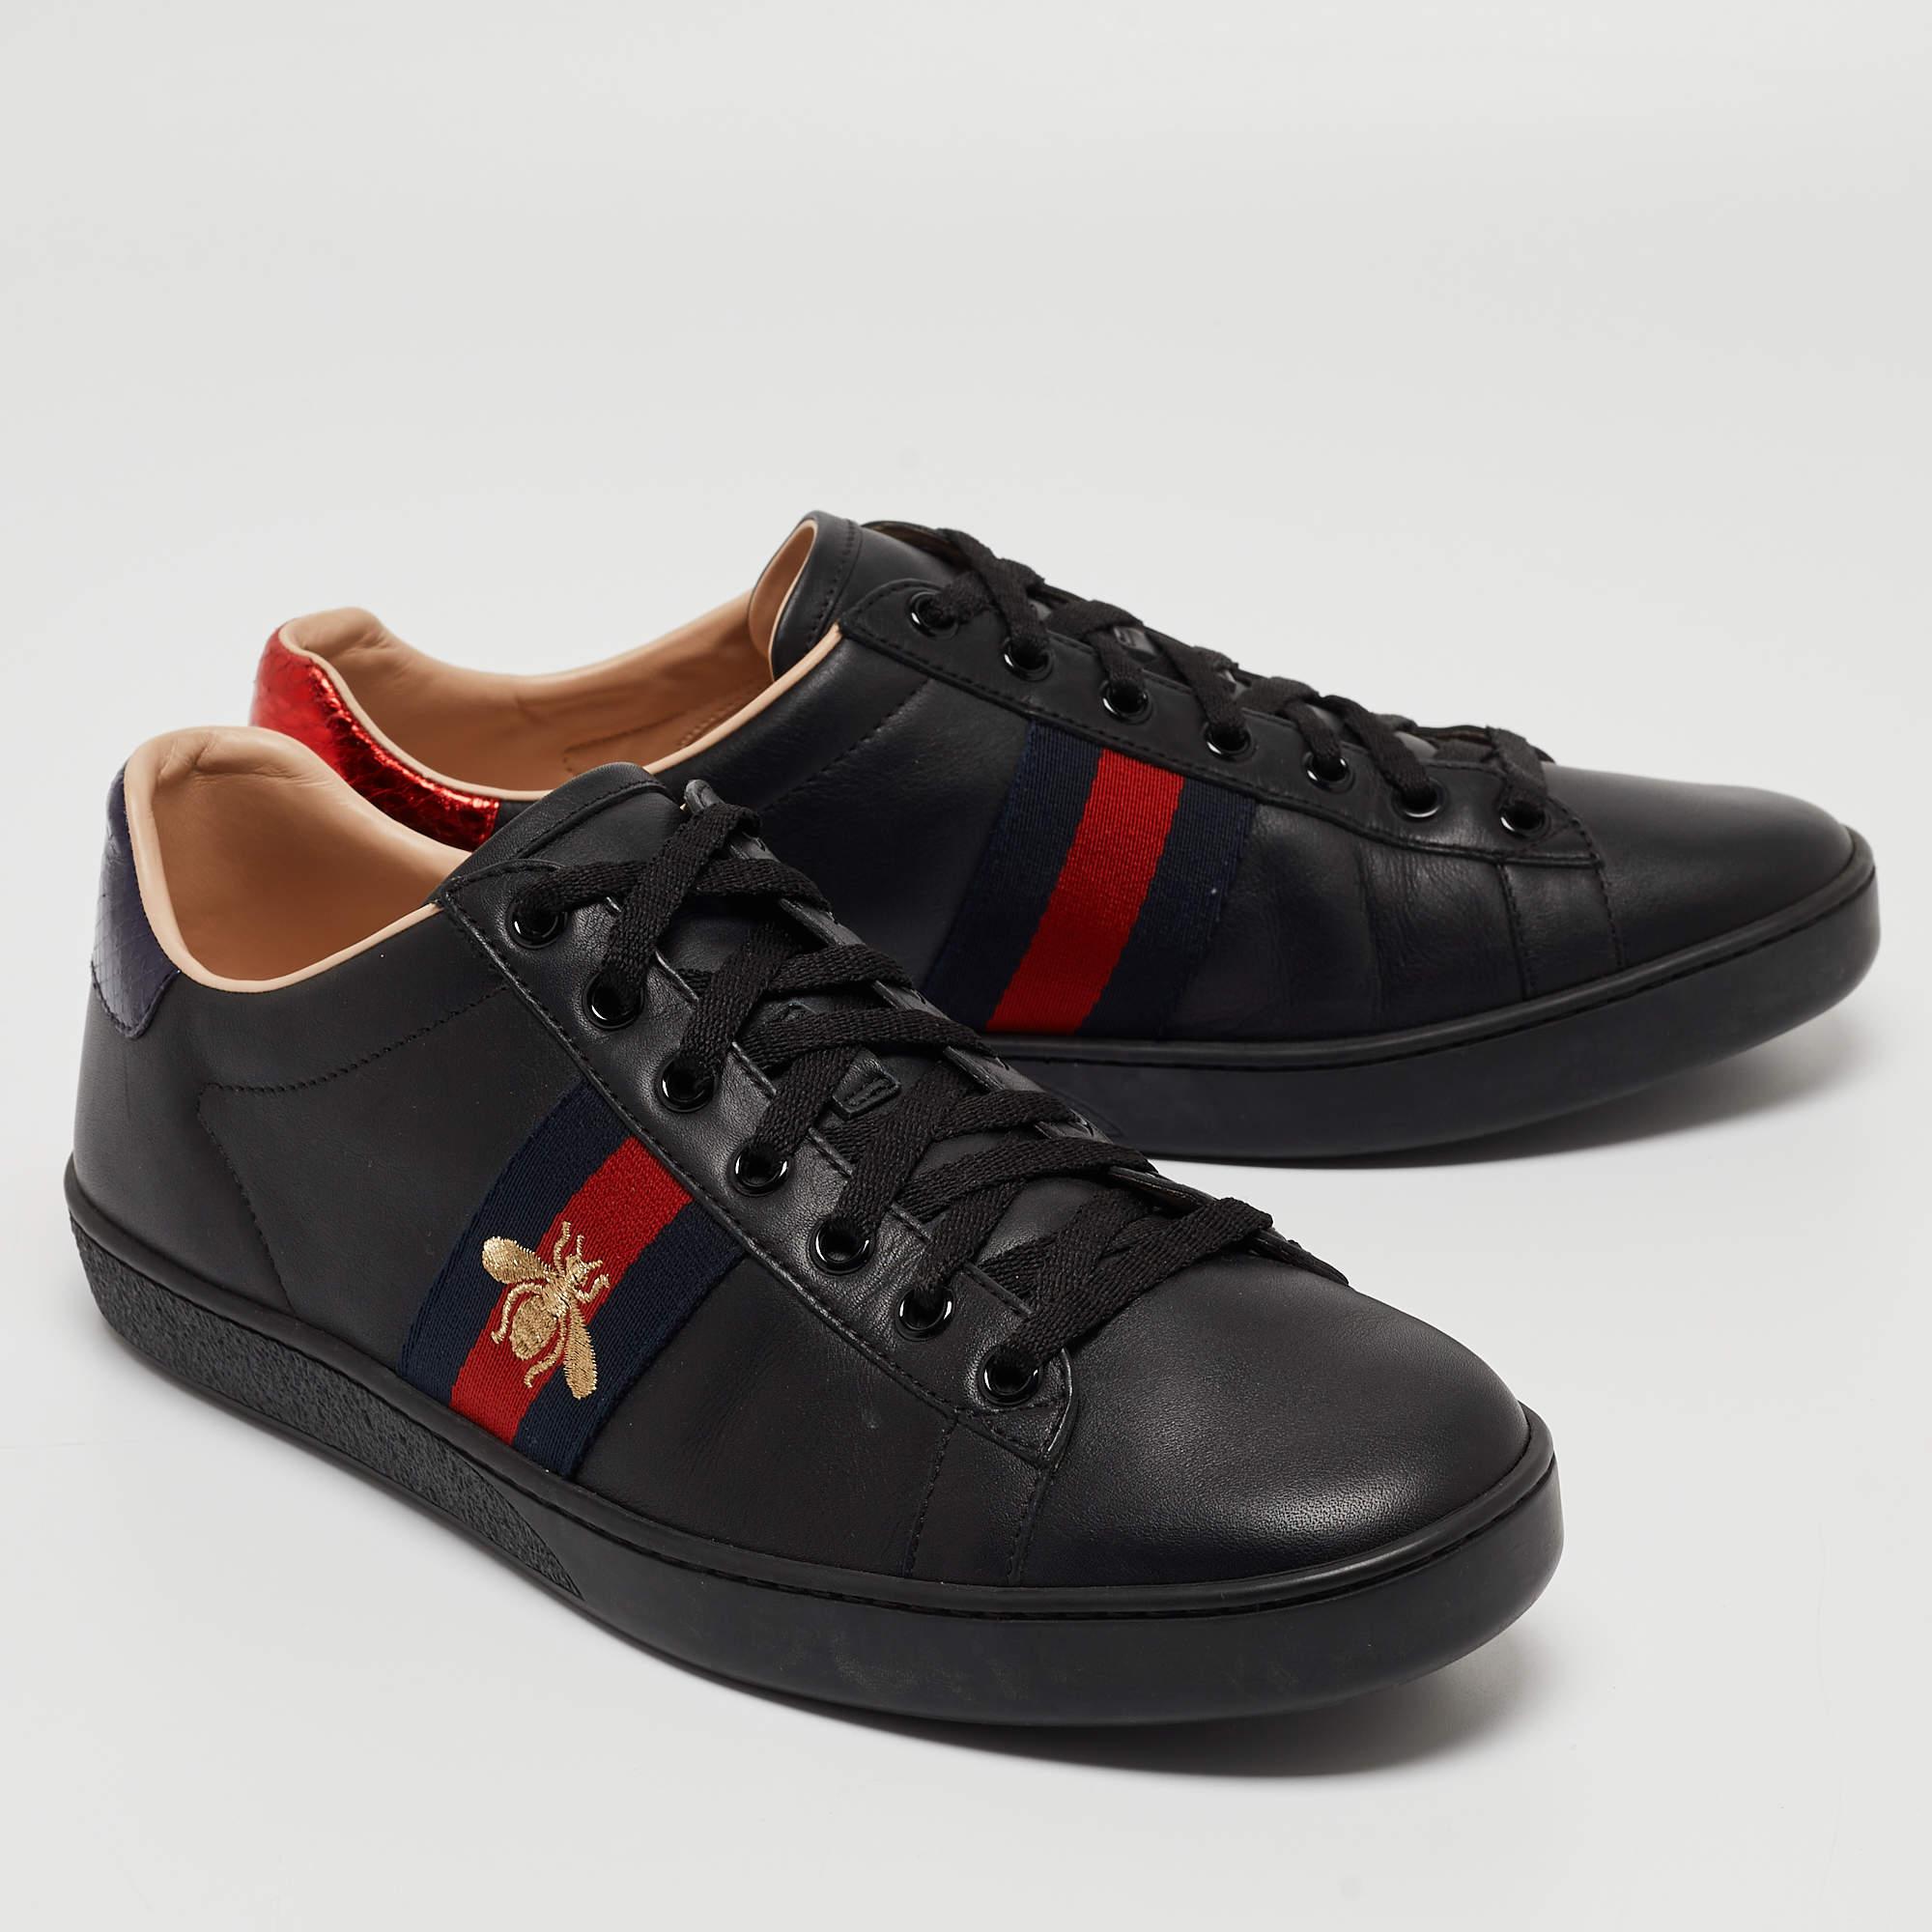 Gucci Black Leather Ace Web Bee Low Top Sneakers Size 39.5 For Sale 4